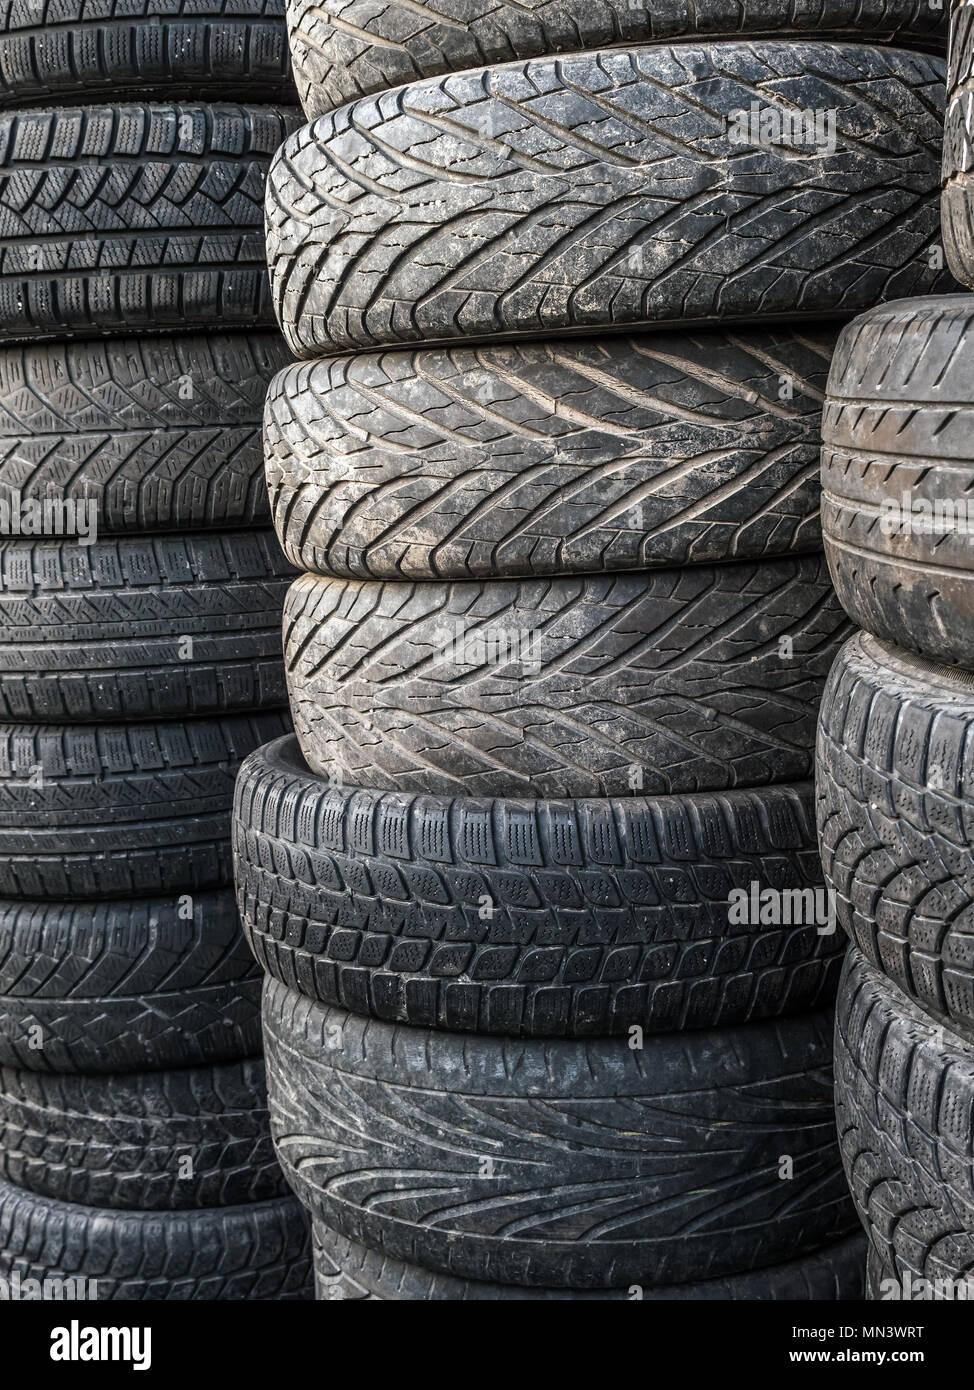 Piles of used and worn car tires Stock Photo